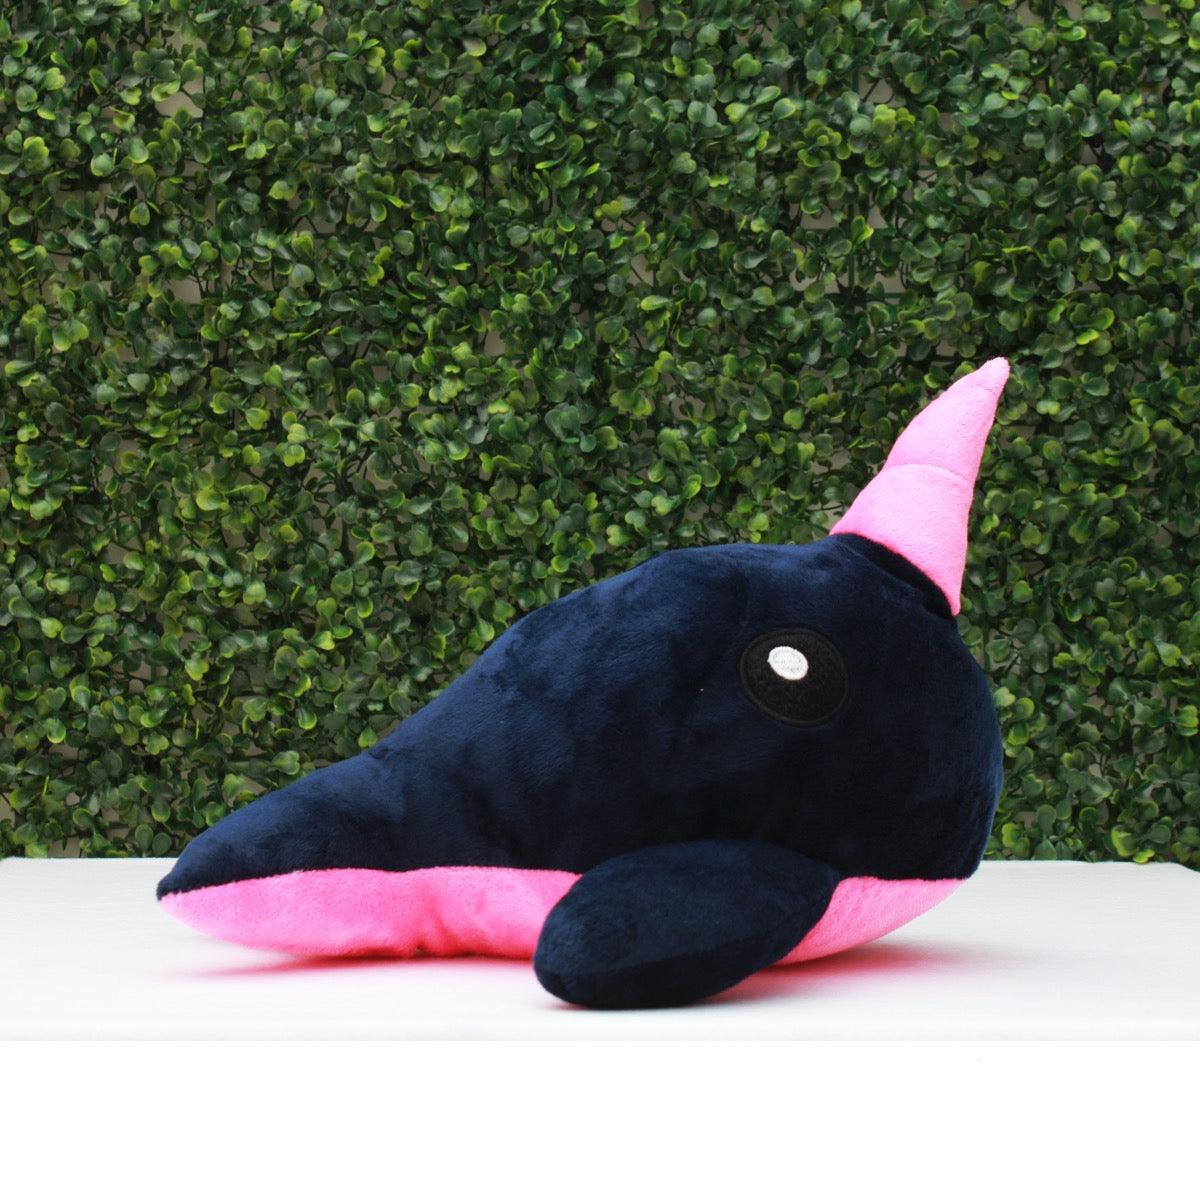 Plushkins Narwhal, Premium Blue & Pink Soft Toy for Kids, Aged 1-10 years, Extra Soft Stuffed Toy with Plyfibre Stuffing